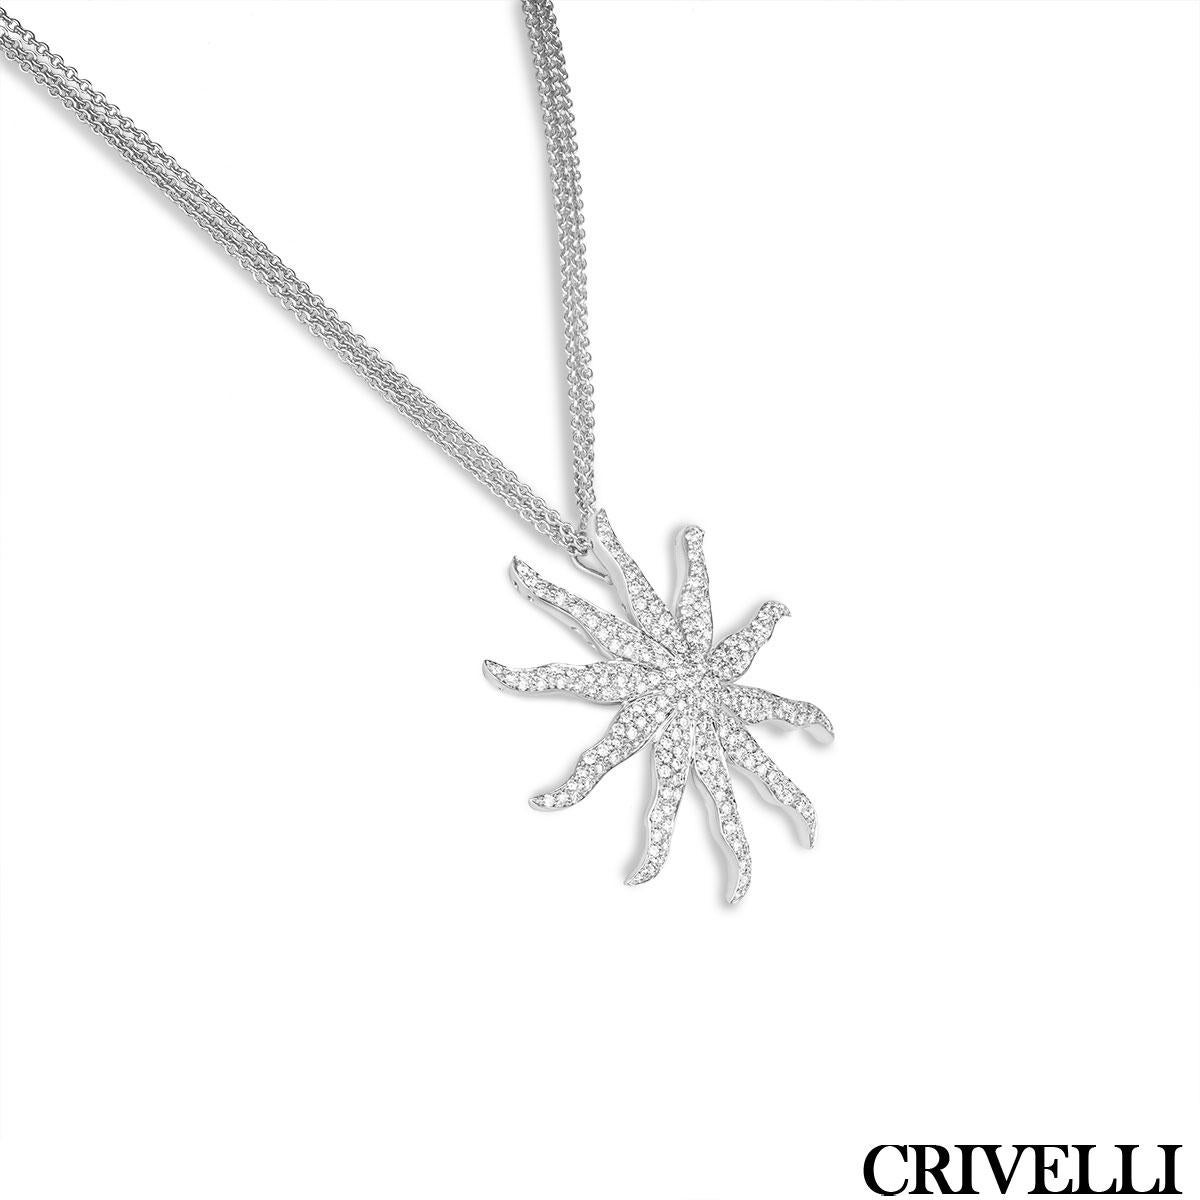 A striking 18k white gold diamond pendant by Crivelli. The sun shaped motif pendant is pave set throughout with 255 round brilliant cut diamonds with an approximate total weight of 4.60ct, E-F colour and VS clarity. The motif is suspended from a